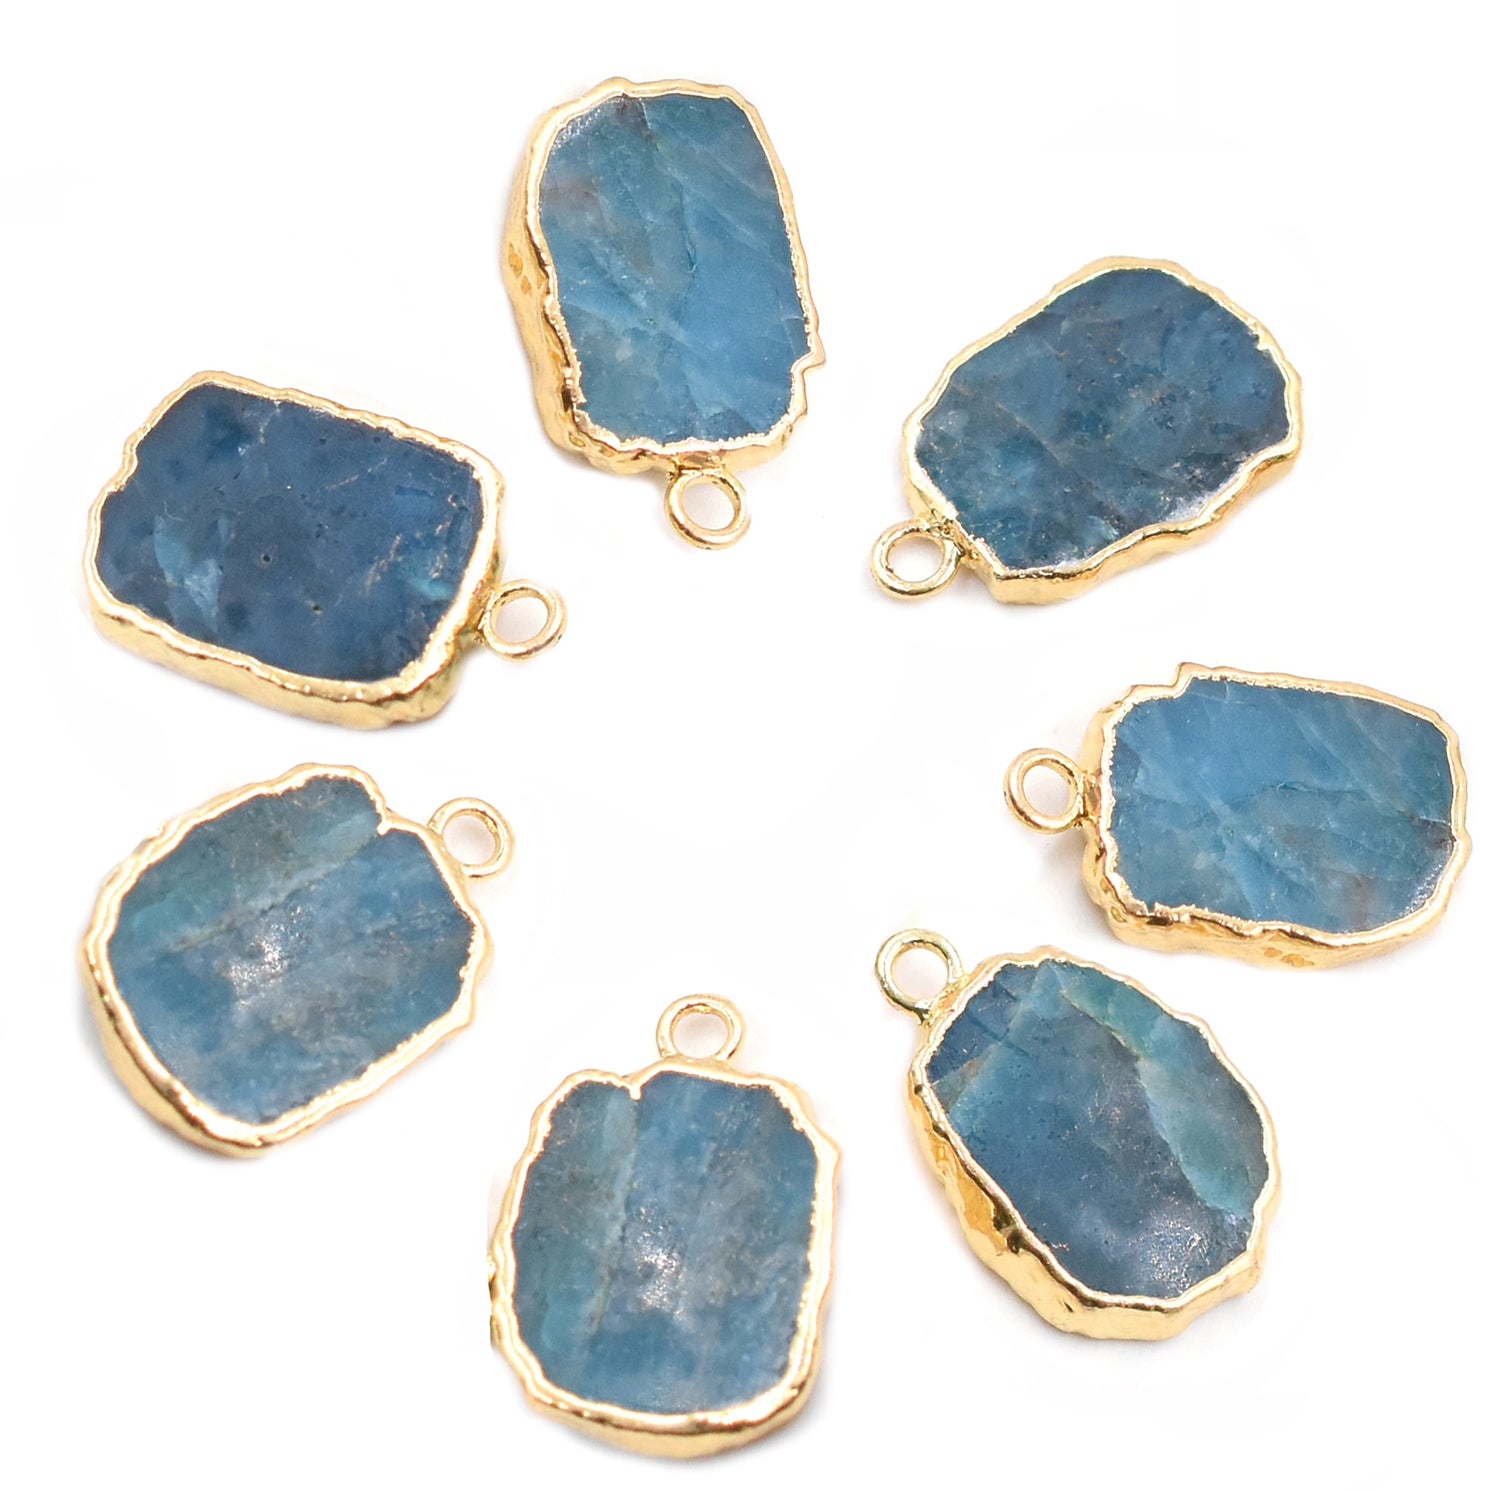 Blue Apatite 14X10 MM Rectangle Shape Gold Electroplated Pendant